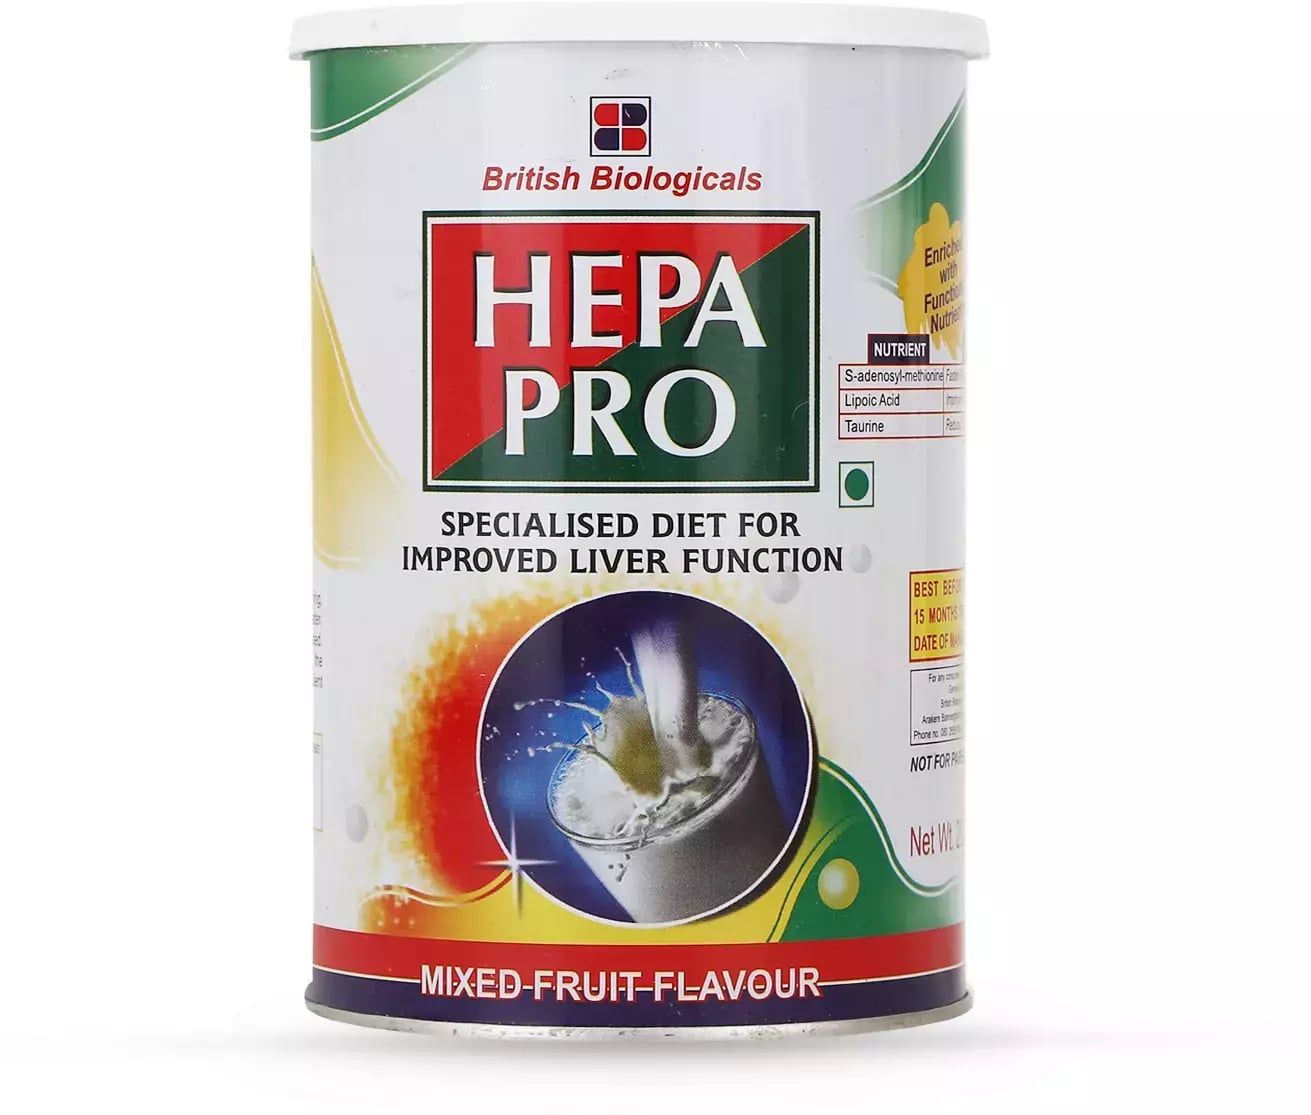 Hepa Pro Mixed Fruit Flavoured Powder, 200 gm Tin, Pack of 1 